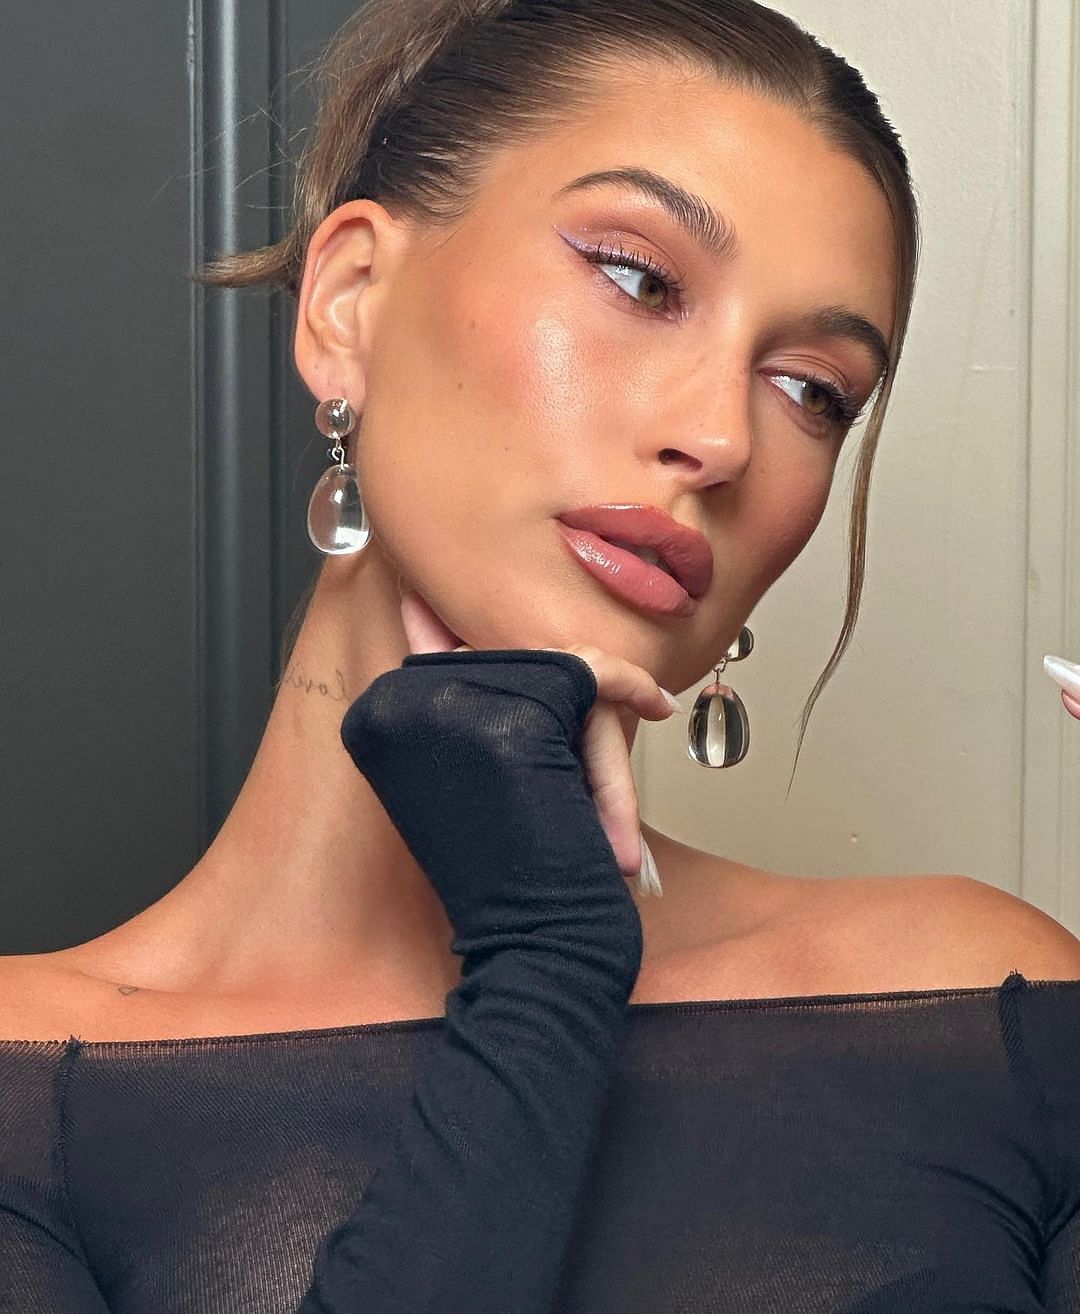 How are Hailey Baldwin and Alec Baldwin related to each other?